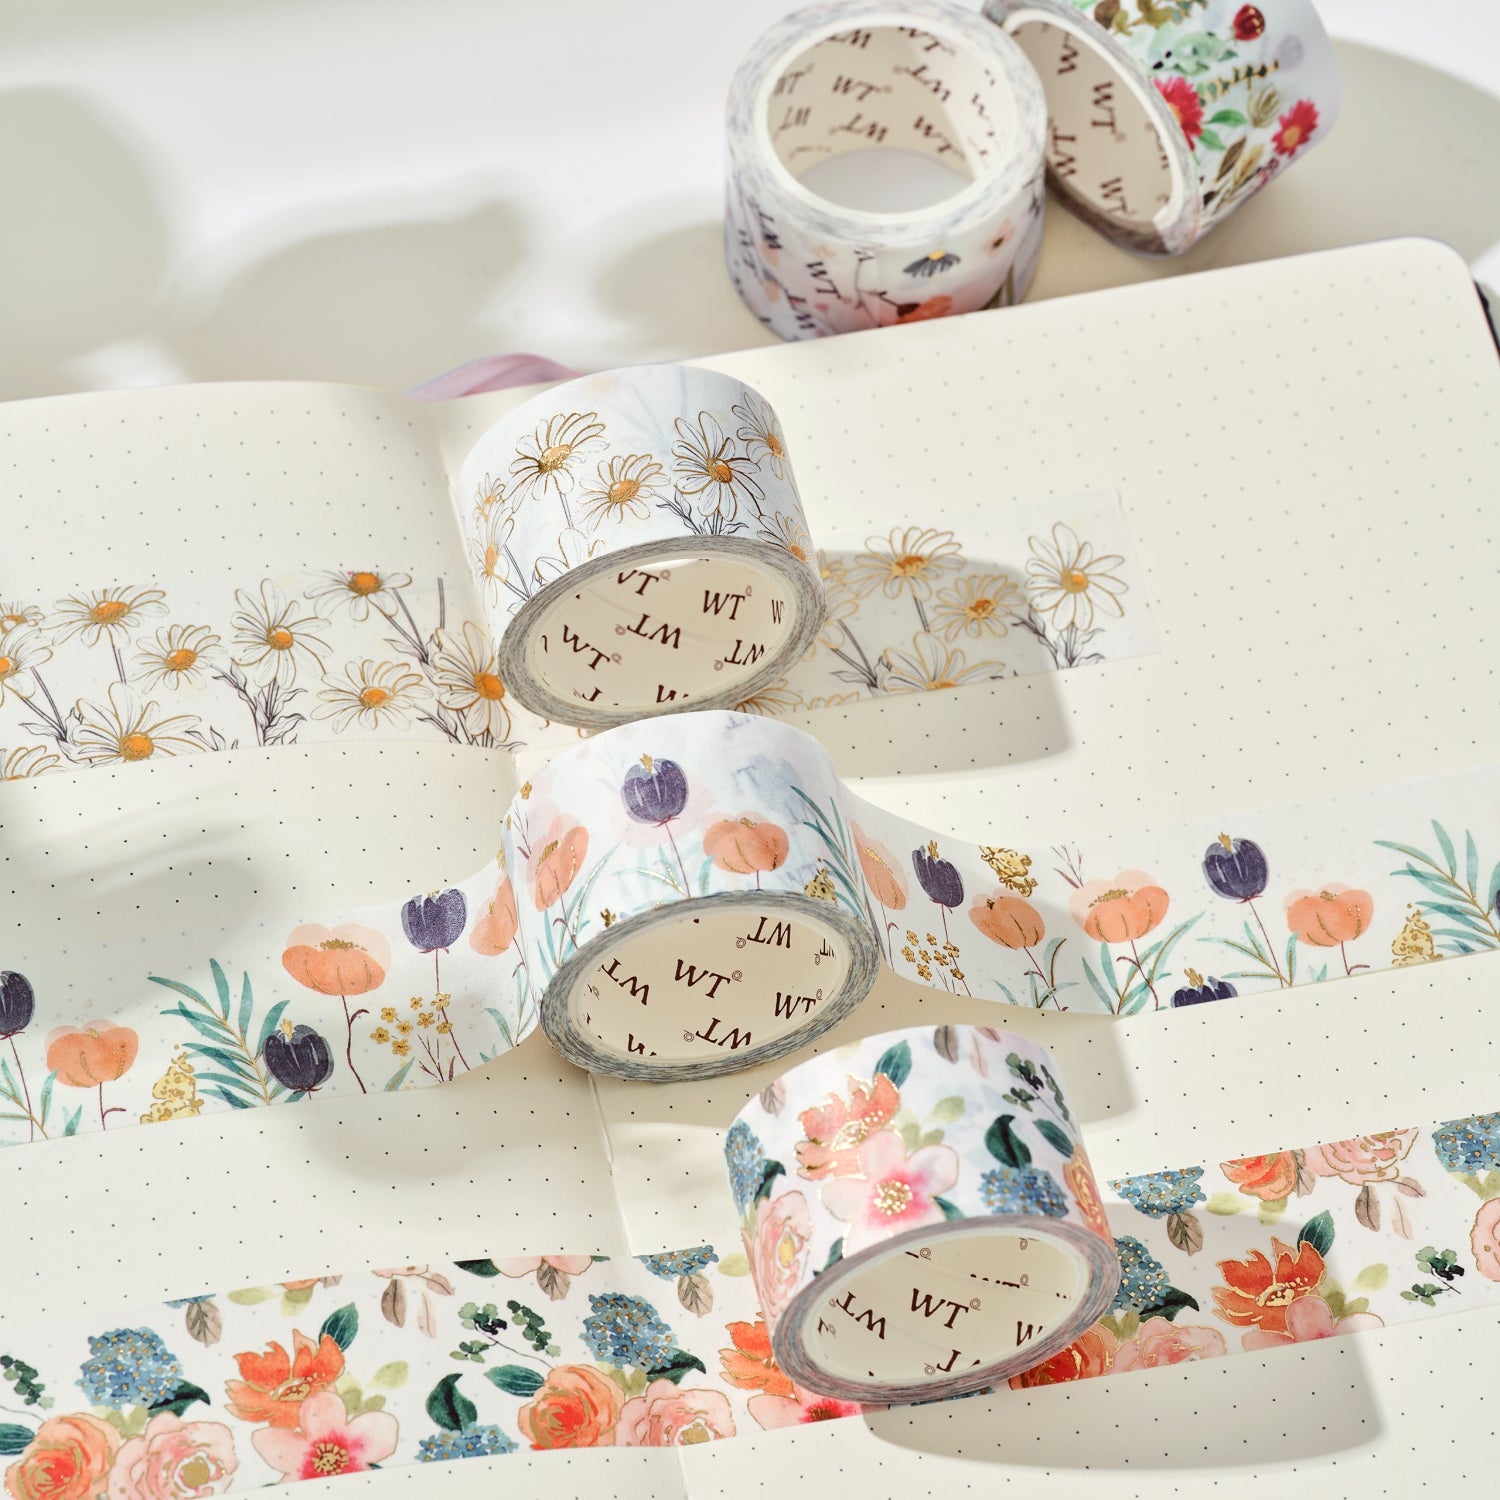 Fragrance Washi Tape Set | The Washi Tape Shop. Beautiful Washi and Decorative Tape For Bullet Journals, Gift Wrapping, Planner Decoration and DIY Projects